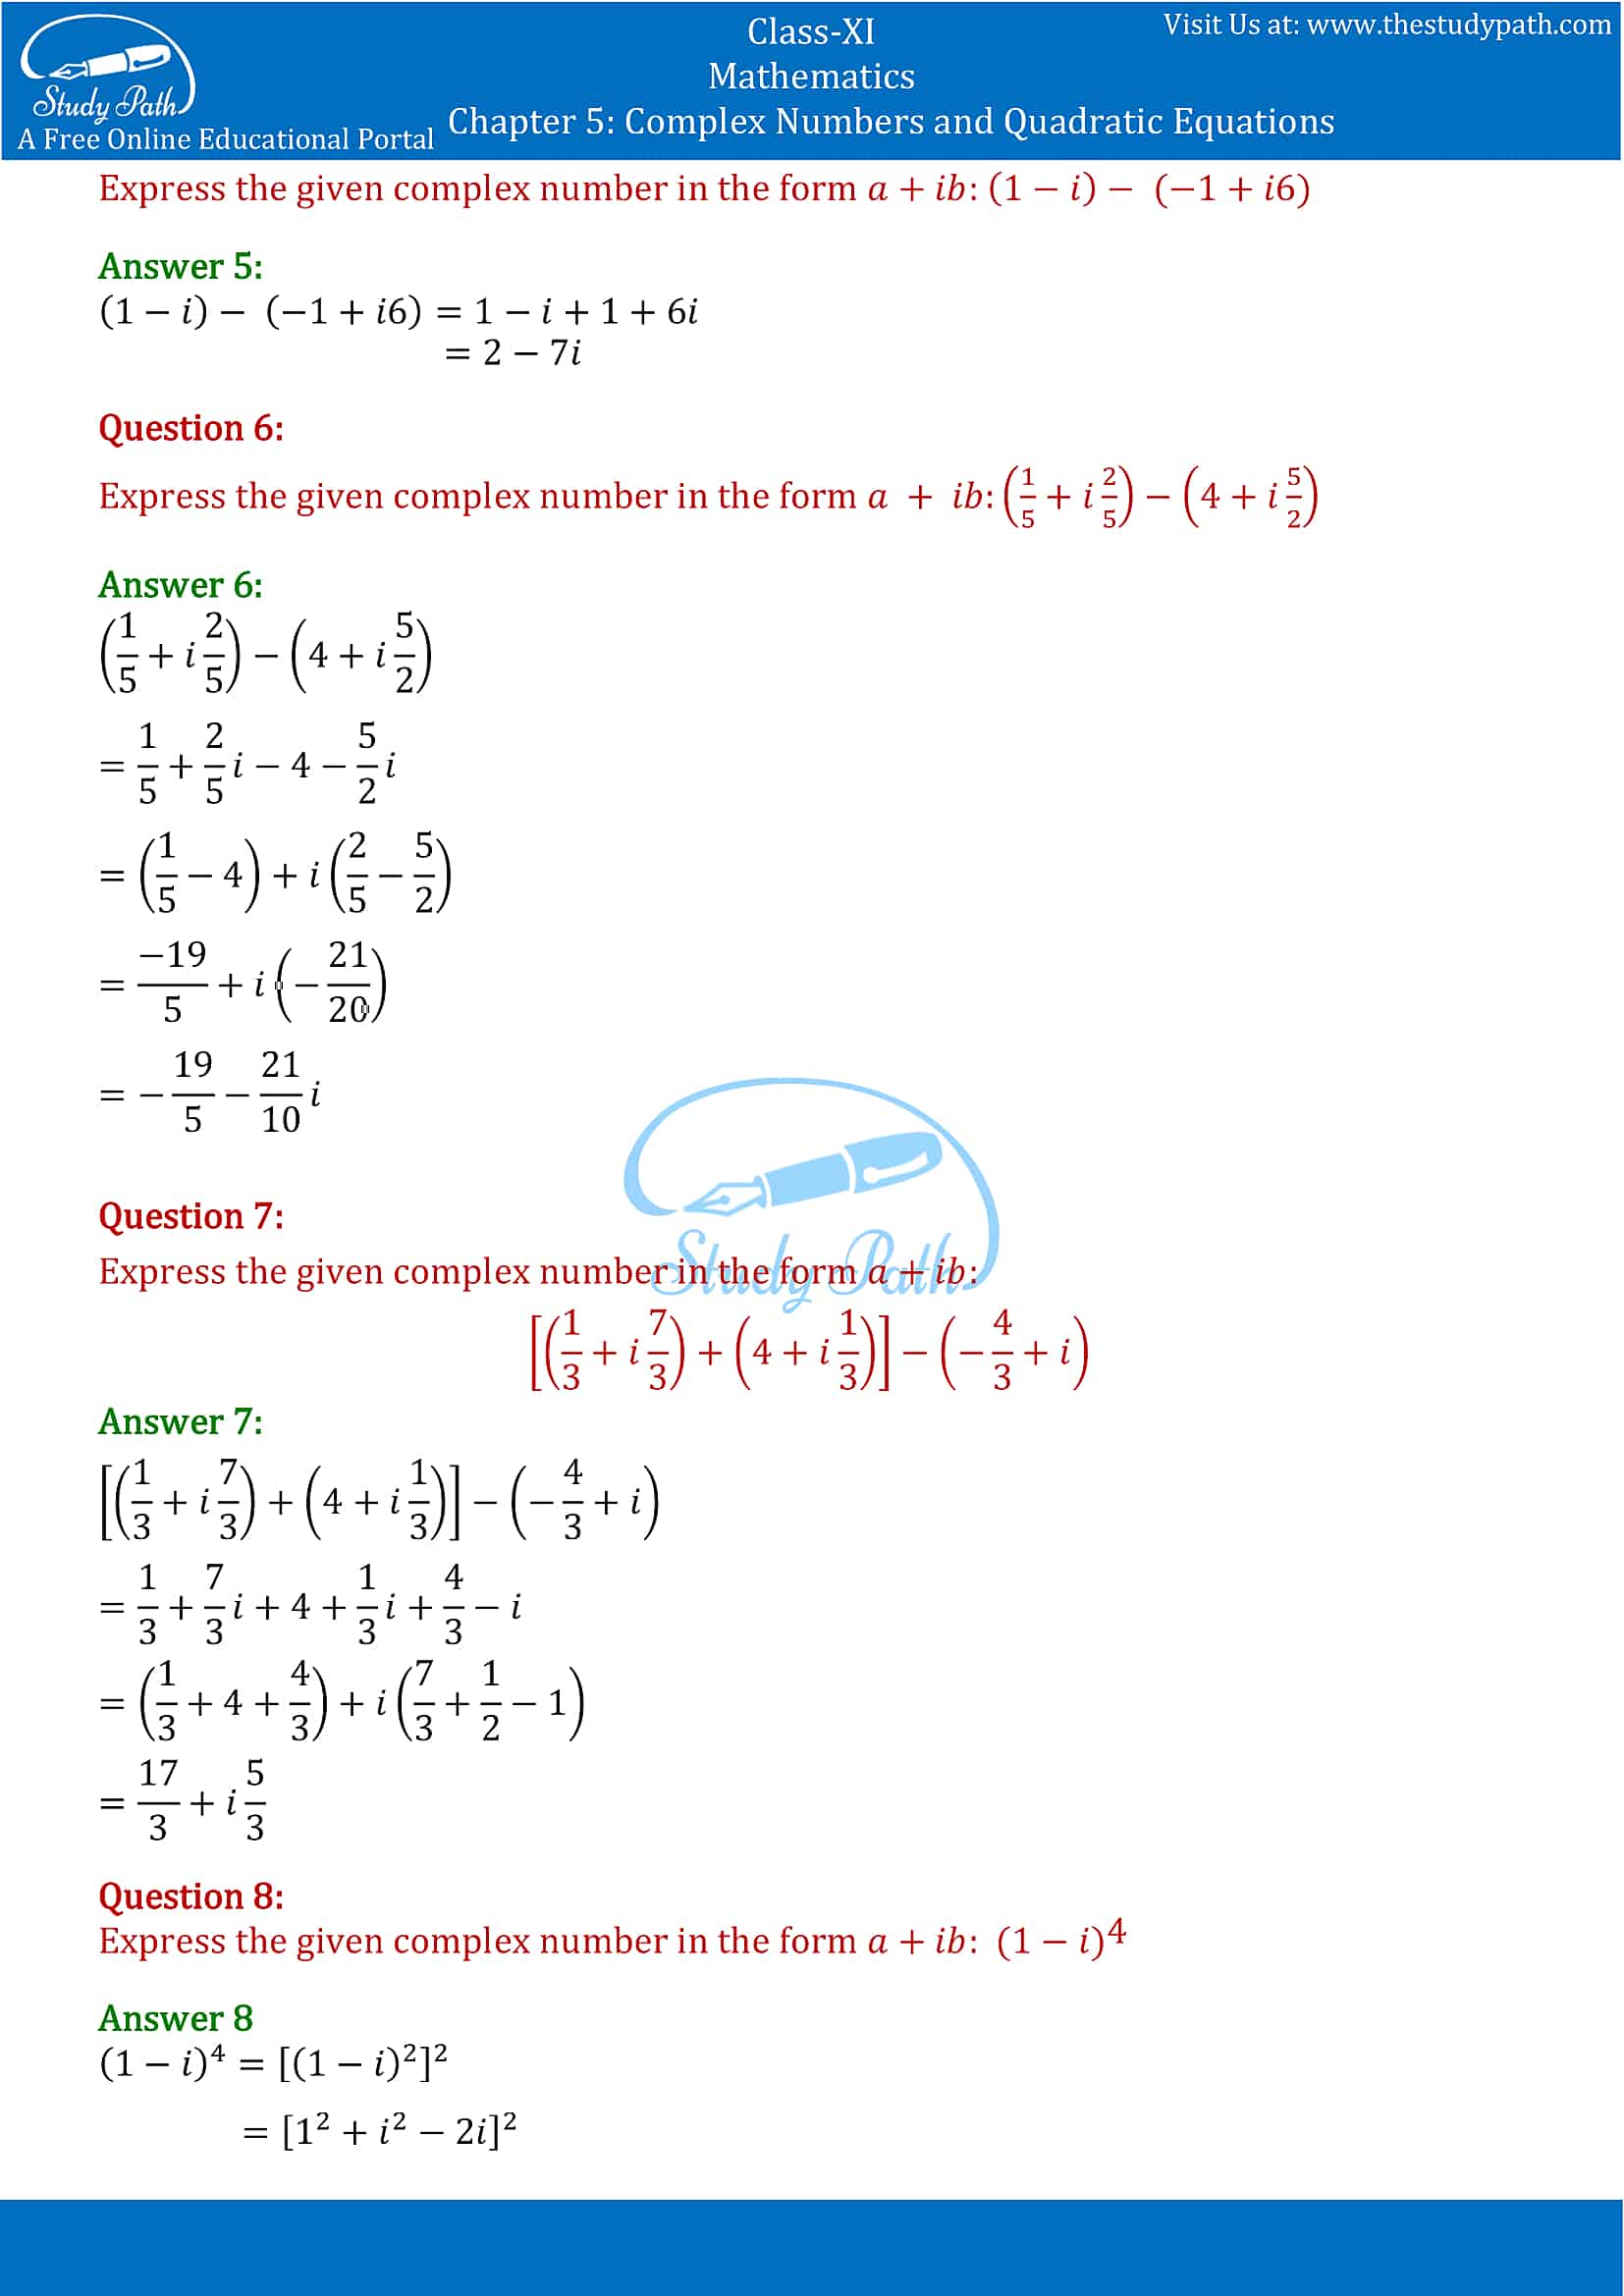 NCERT Solutions for Class 11 Maths chapter 5 Complex Numbers and Quadratic Equations Exercise 5.1 part-2